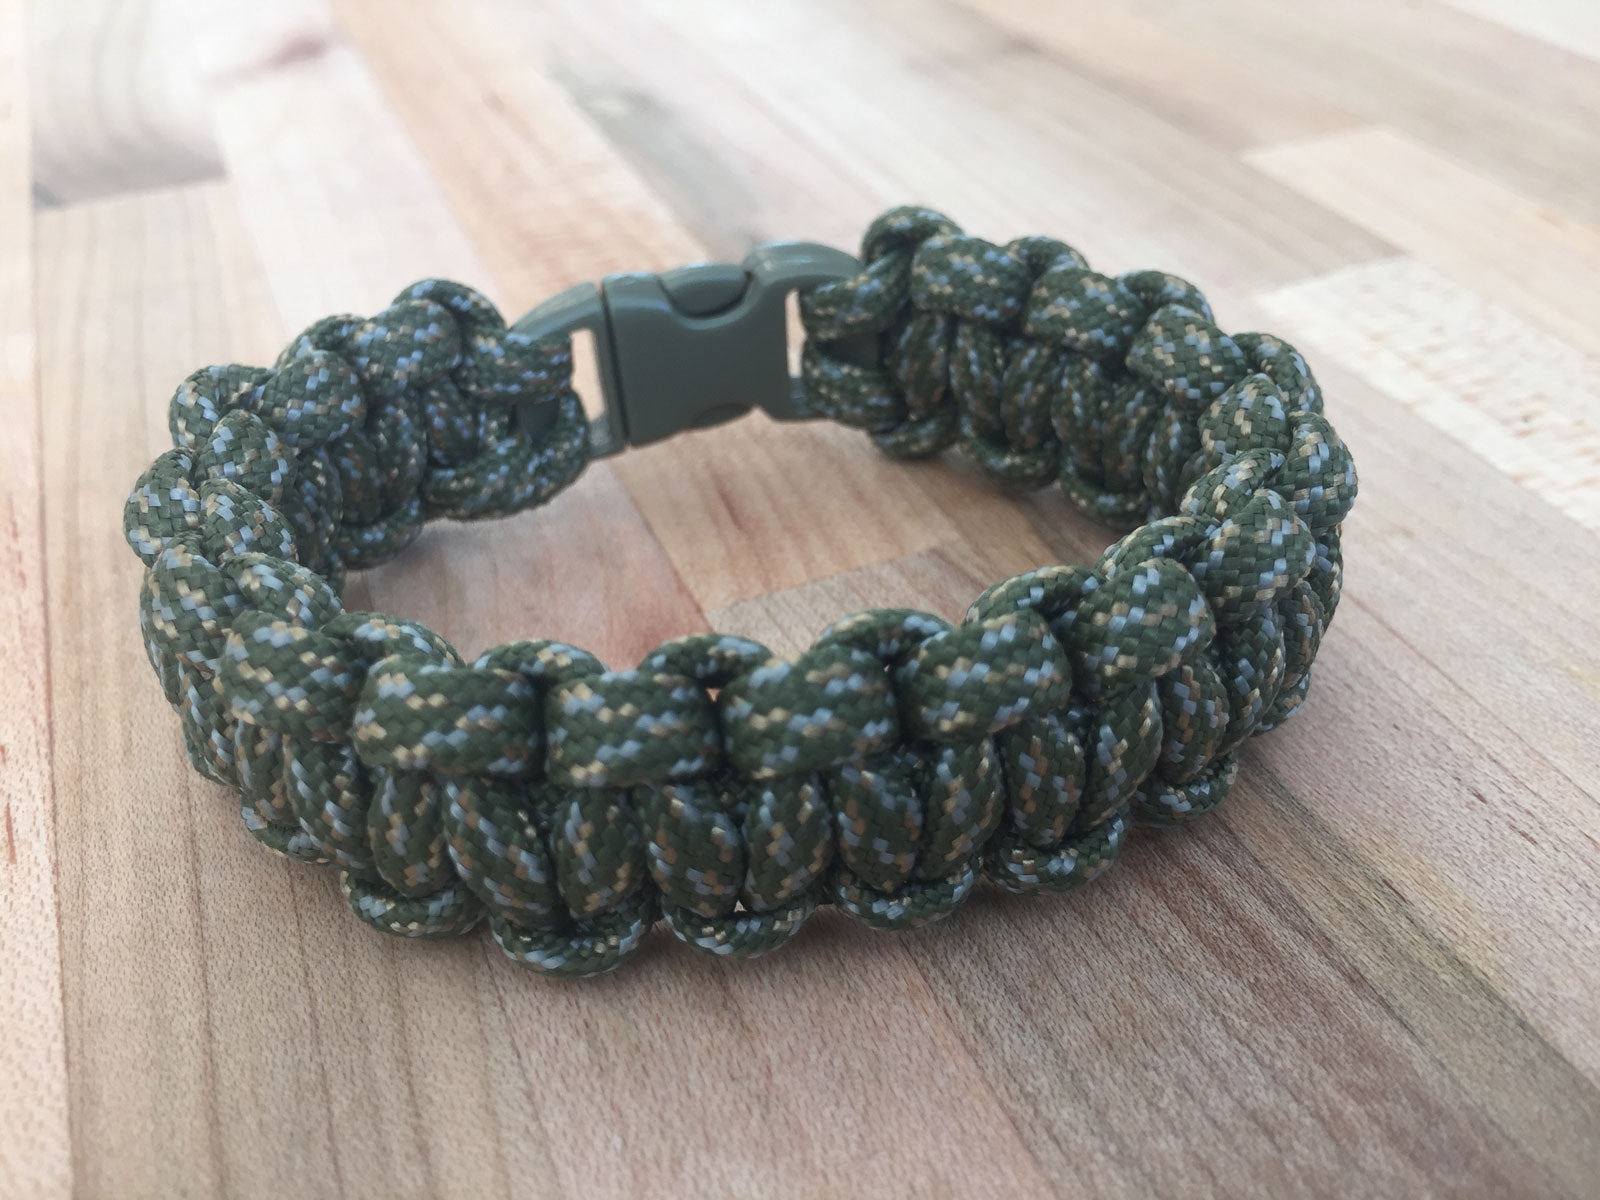 Easy Step-By-Step Instructions for Making a Paracord Bracelet